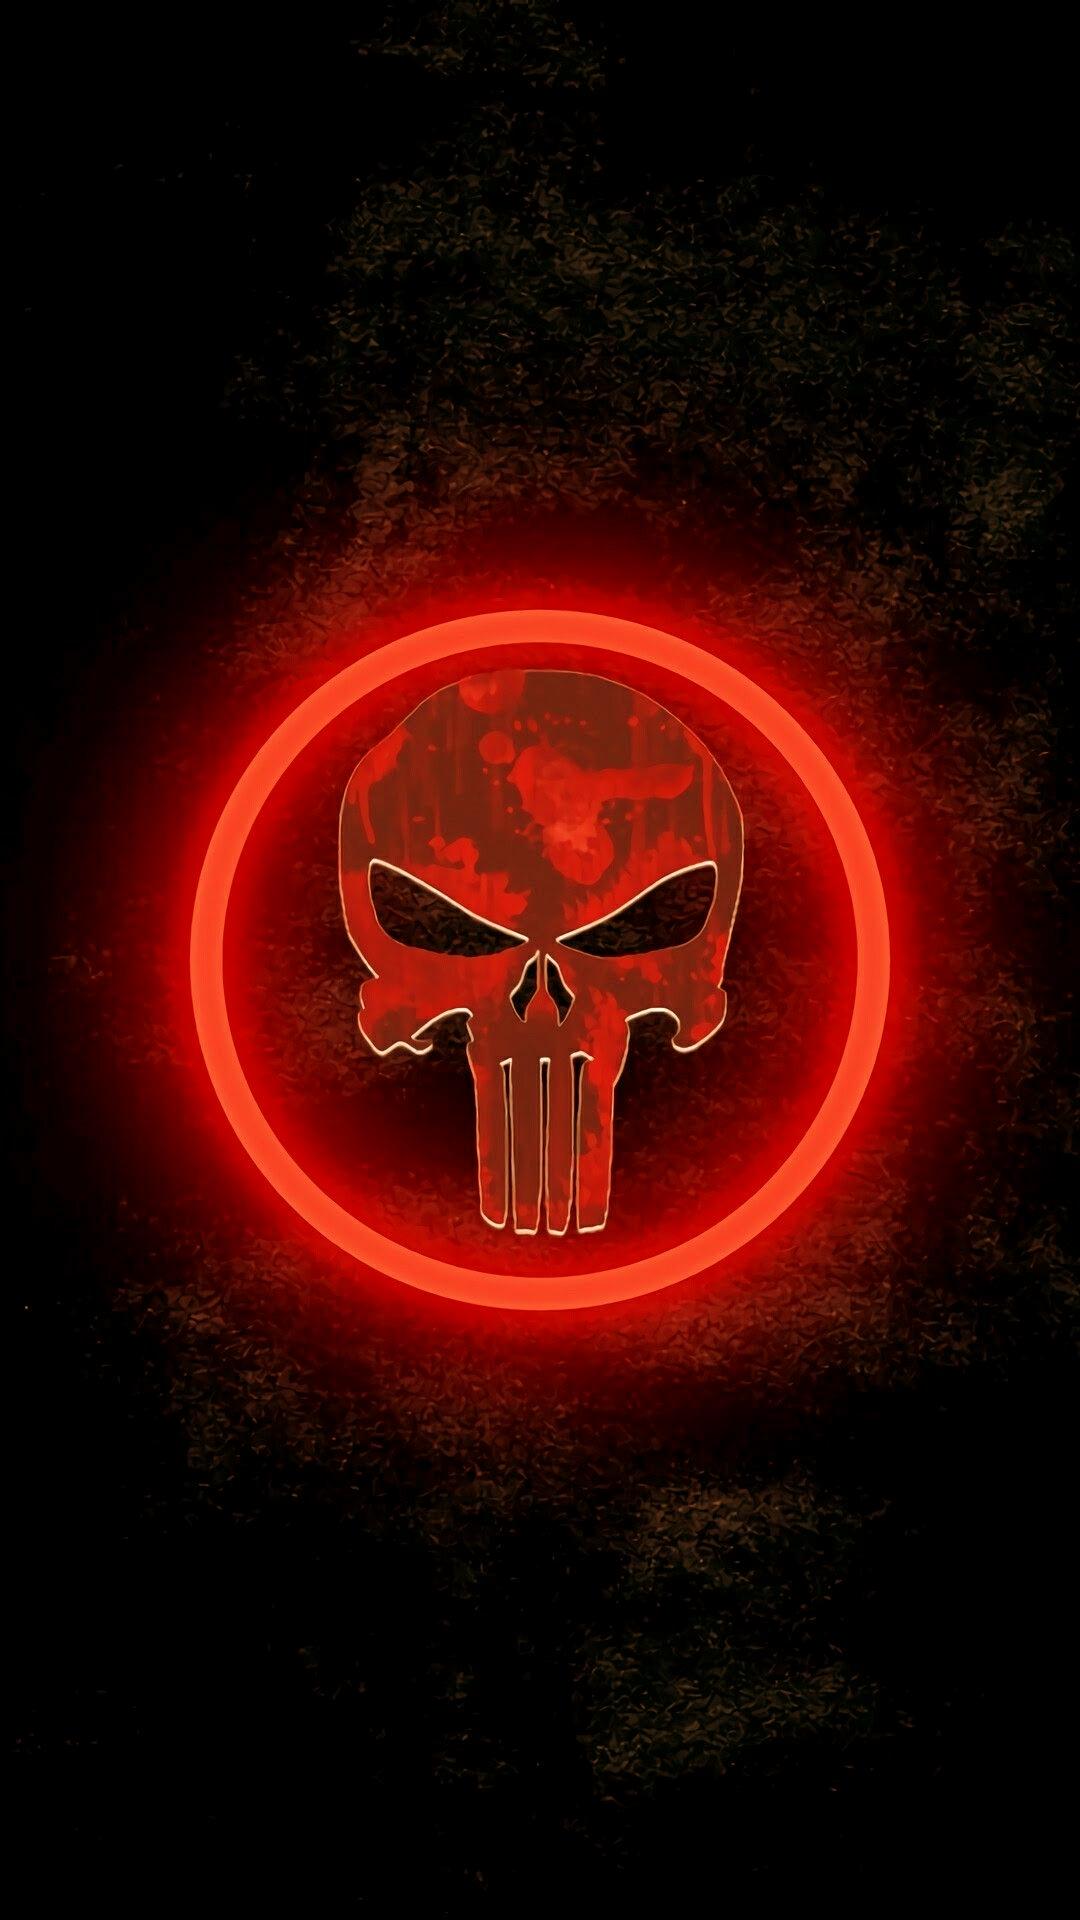 Have a Punisher mobile wallpaper